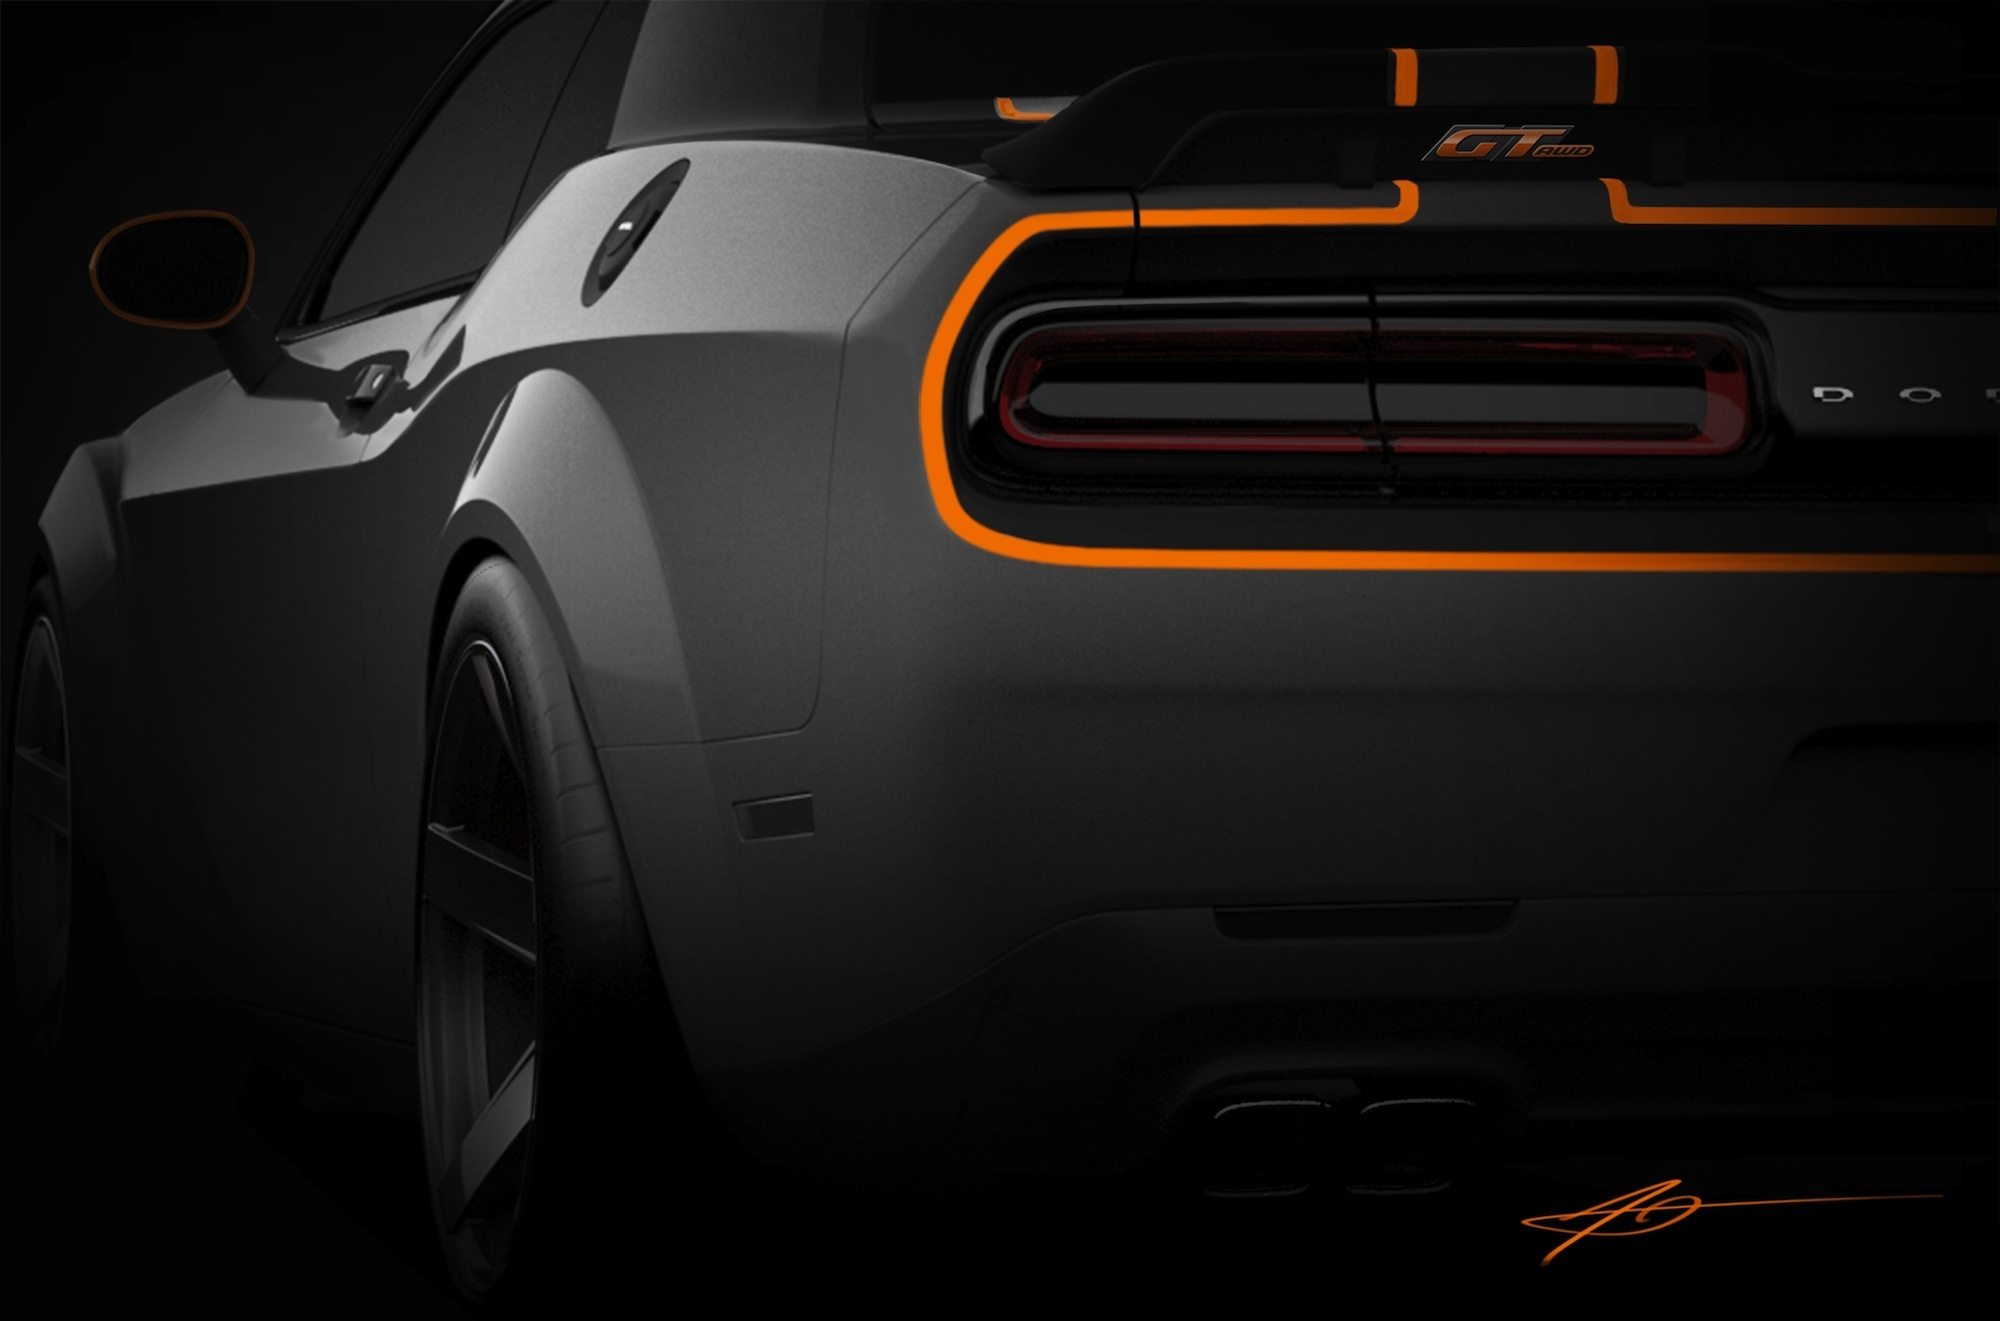 A sneak peek at the Mopar-customized Dodge Challenger, one of many Mopar-modified vehicles that will debut at the Specialty Equipment Market Association (SEMA) Show, November 3-6 at the Las Vegas Convention Center.